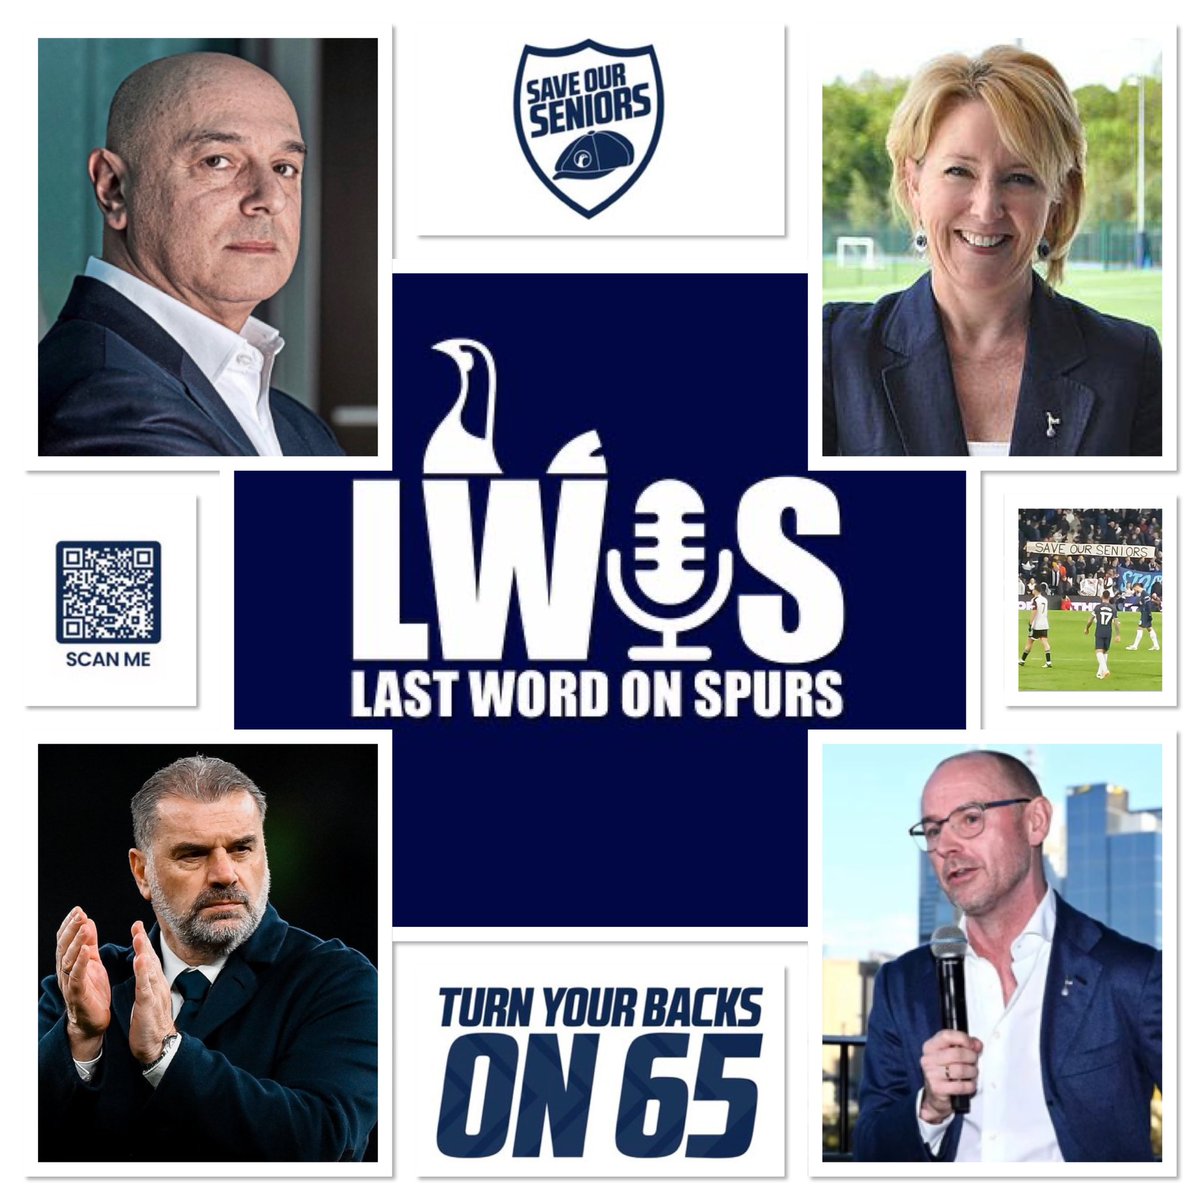 🚨𝐔𝐏𝐂𝐎𝐌𝐈𝐍𝐆 | @RickySacks, @THFCSince76, @Anthoulla1, @AbyssTalks Via @SaveOurSenior66 🔛 @LastWordOnSpurs ➡️ 9PM: 👥 Who We Are ✍️ What We’re Calling For 🪜 Next Steps ⚽️ Ultimate Goal 🛎Subscribe: youtube.com/@LastWordOnSpu… 🔗YouTube: youtube.com/live/E0J604Oph… #THFC #COYS